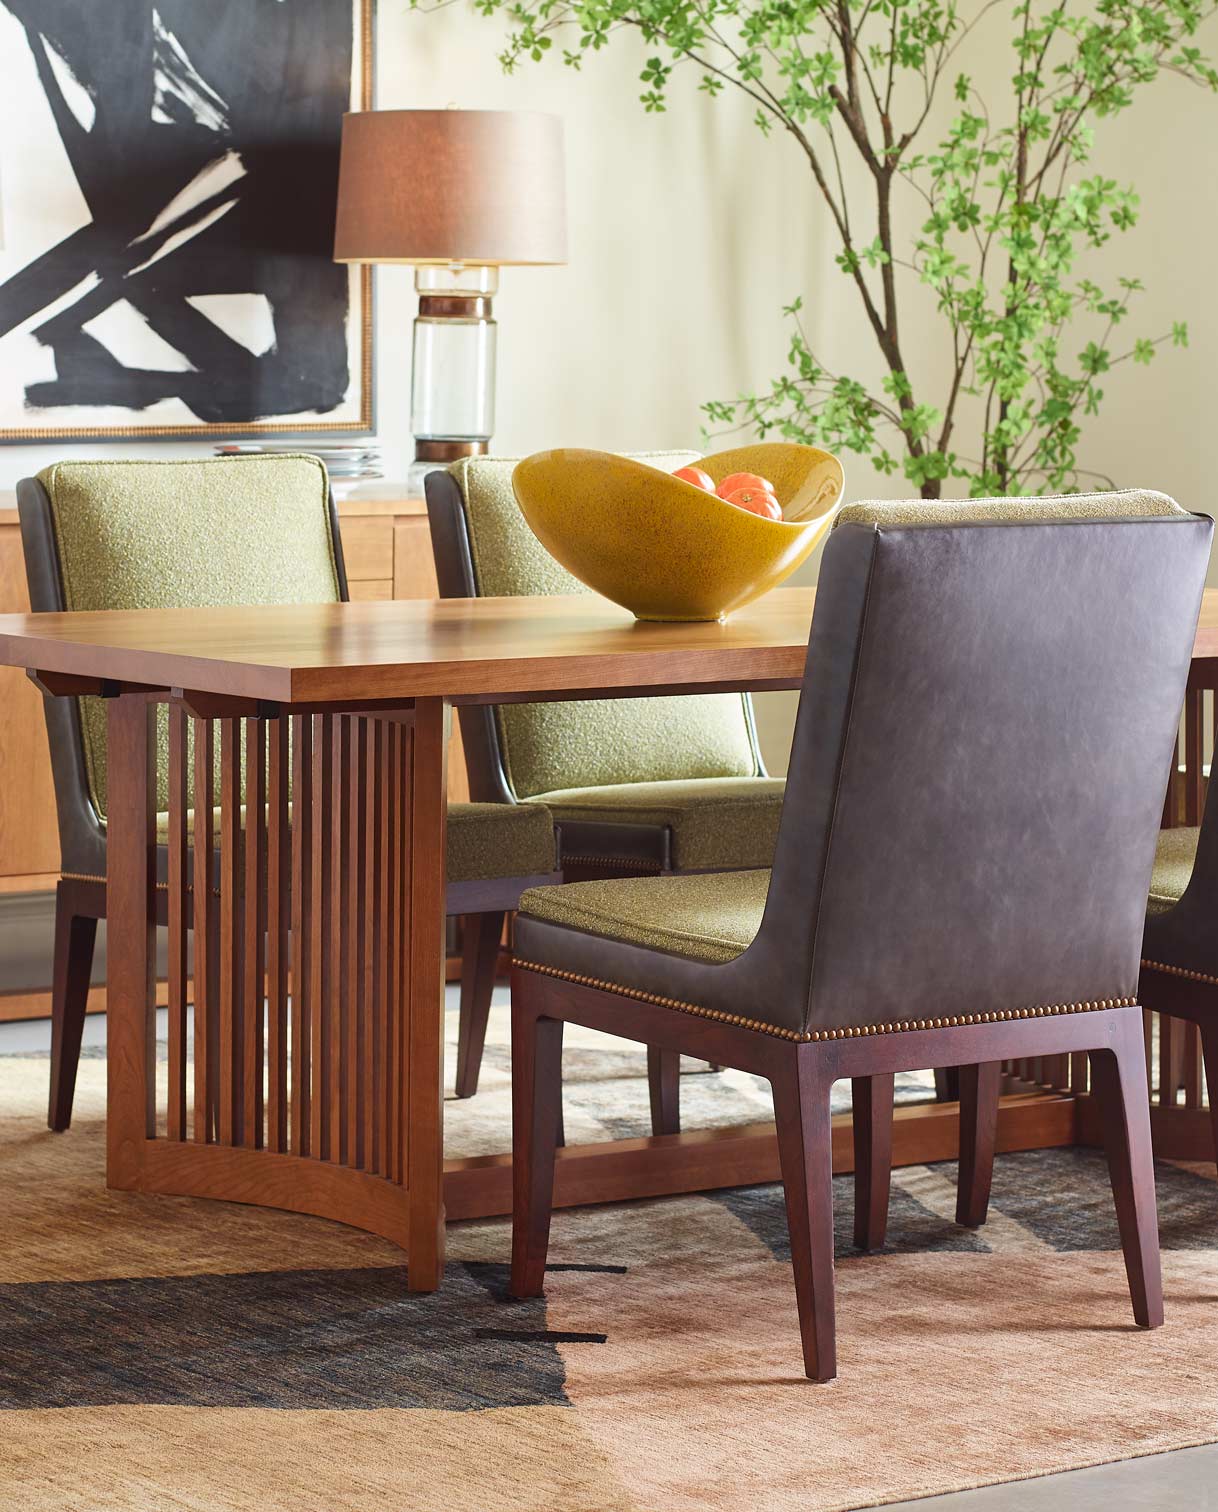 Stickley Furniture Park Slope collection dining room table and chairs